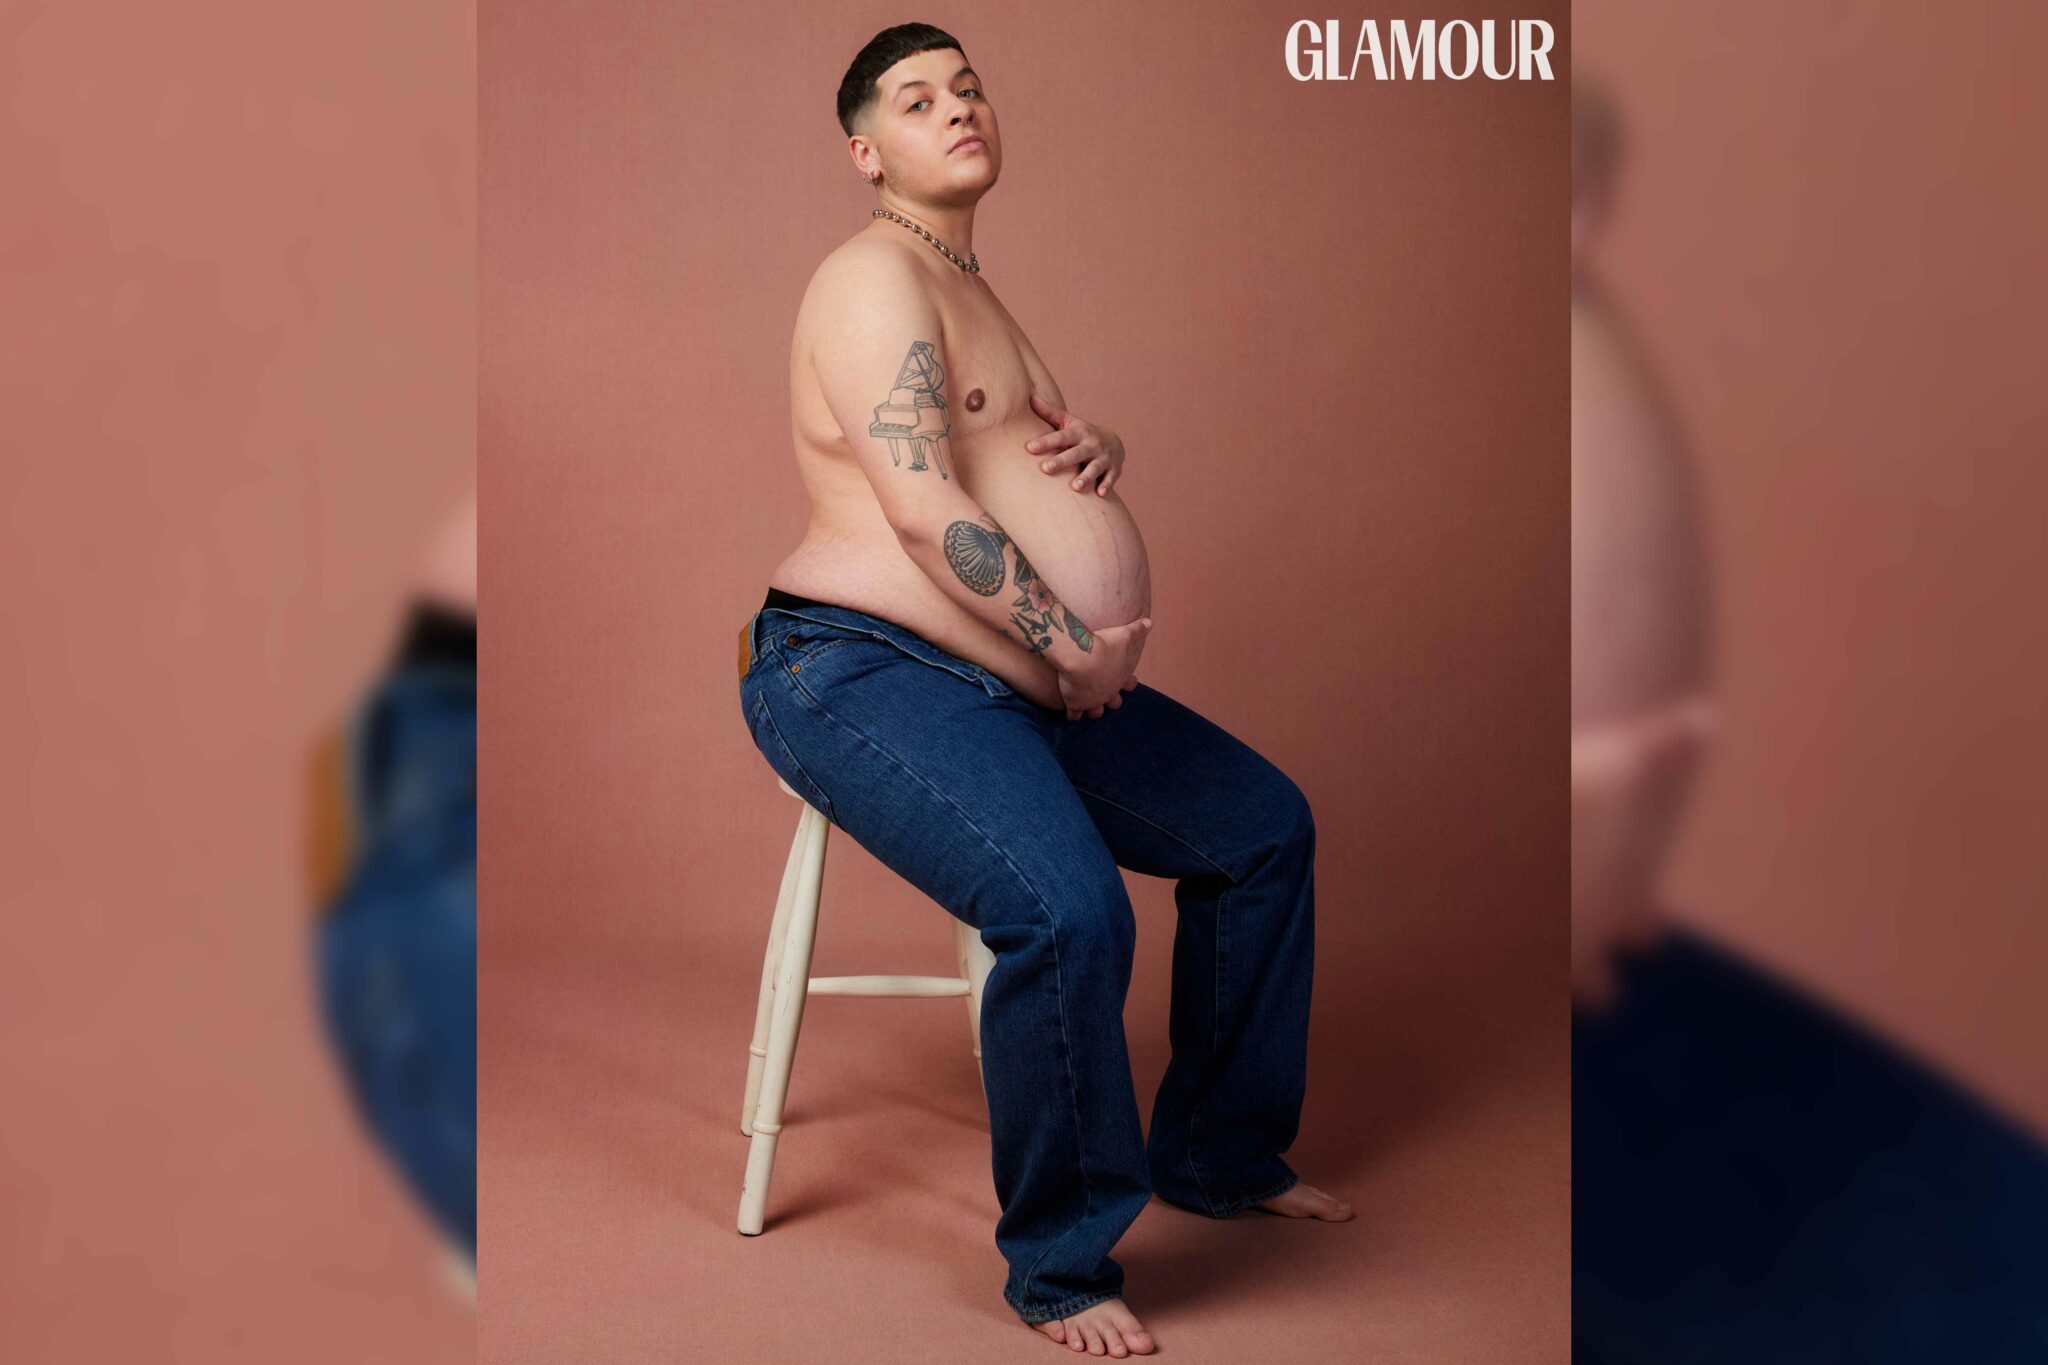 In celebration of Pride month, the British edition of Glamour, a women's fashion publication, features Logan Brown, a transgender individual who identifies as a man, and is currently pregnant